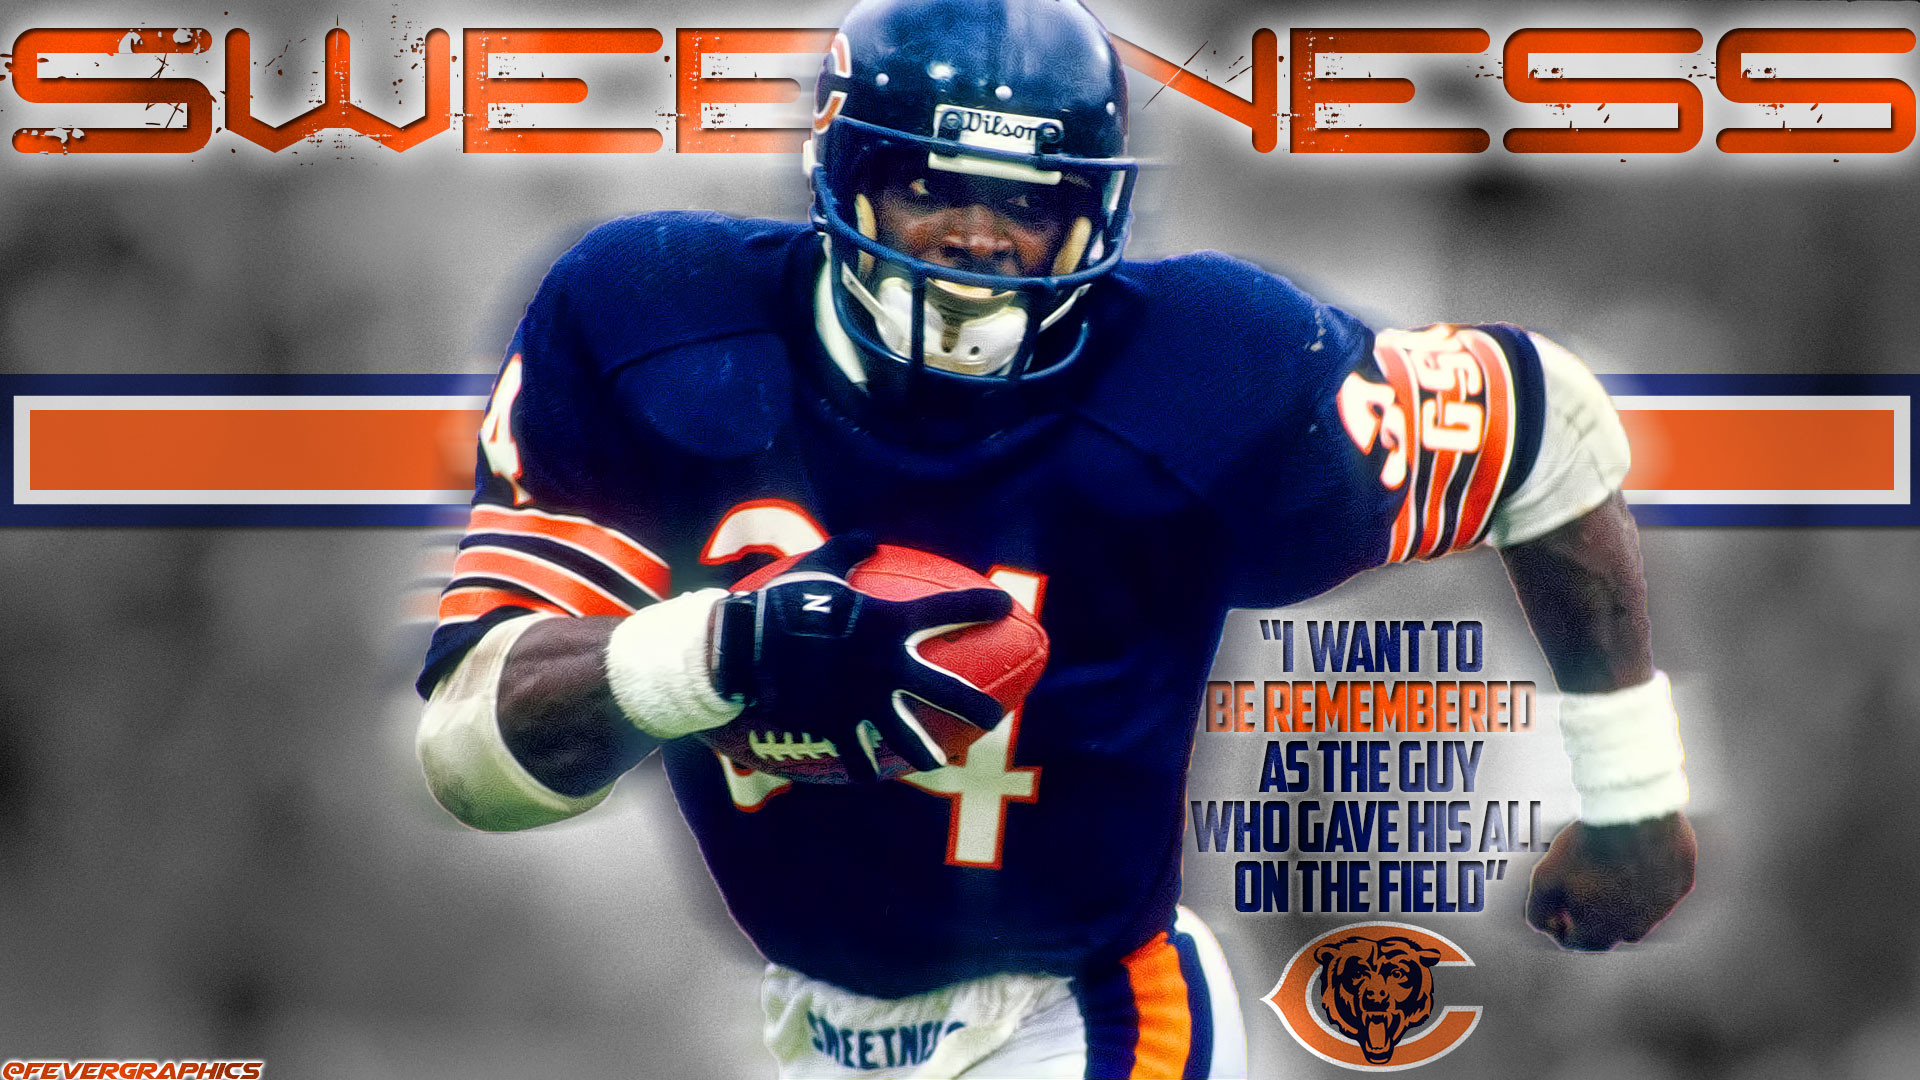 Walter payton wallpapers pictures